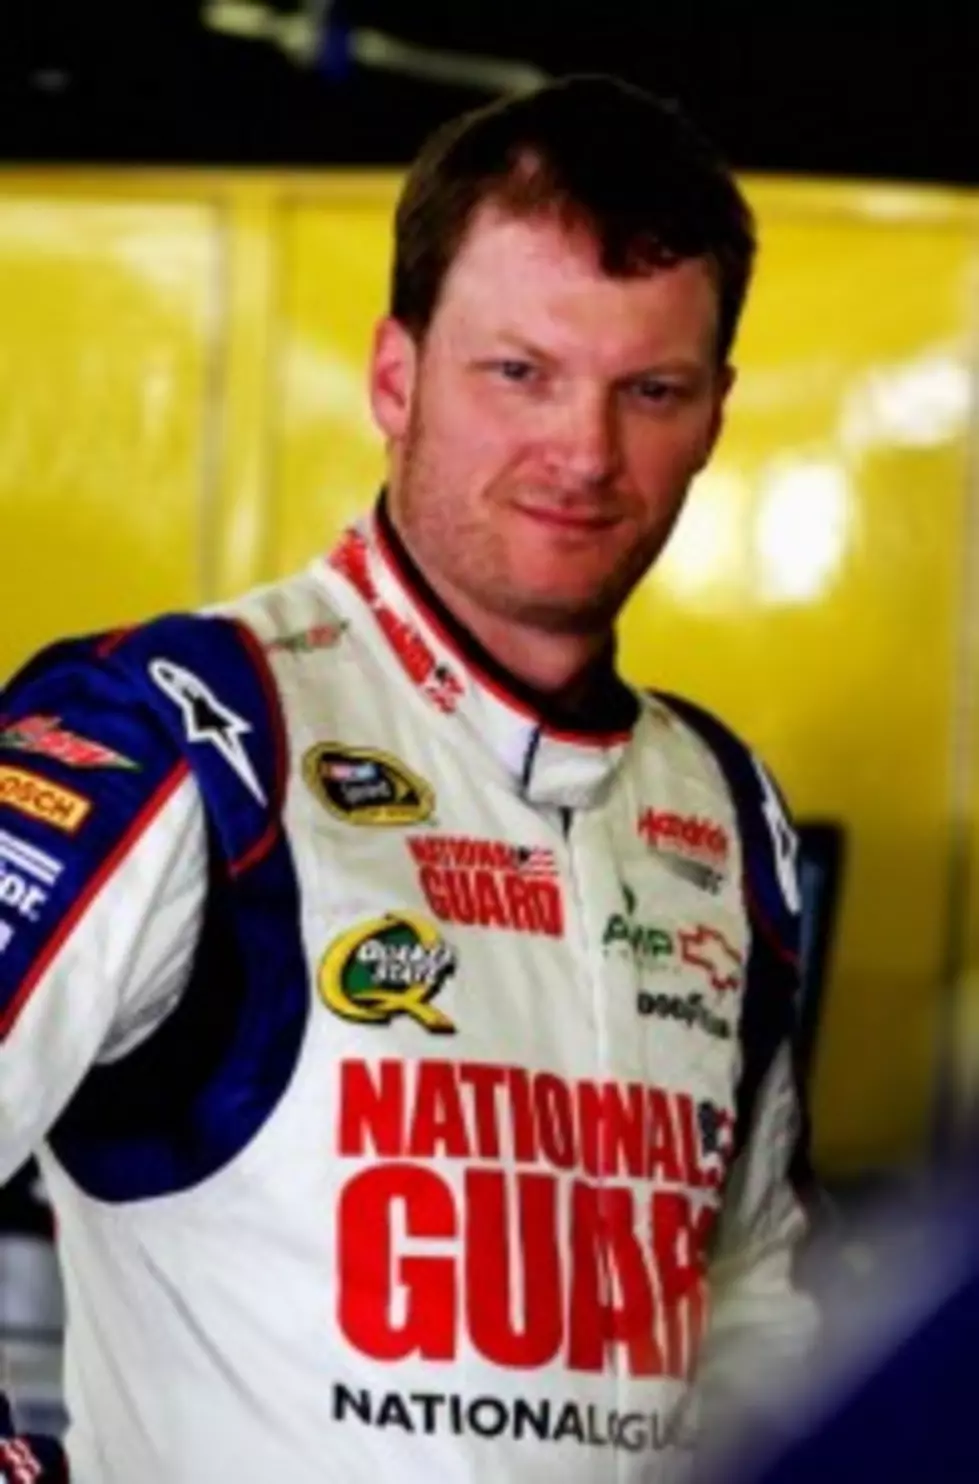 NASCAR Driver of the Day &#8211; Dale Earnhardt Jr.